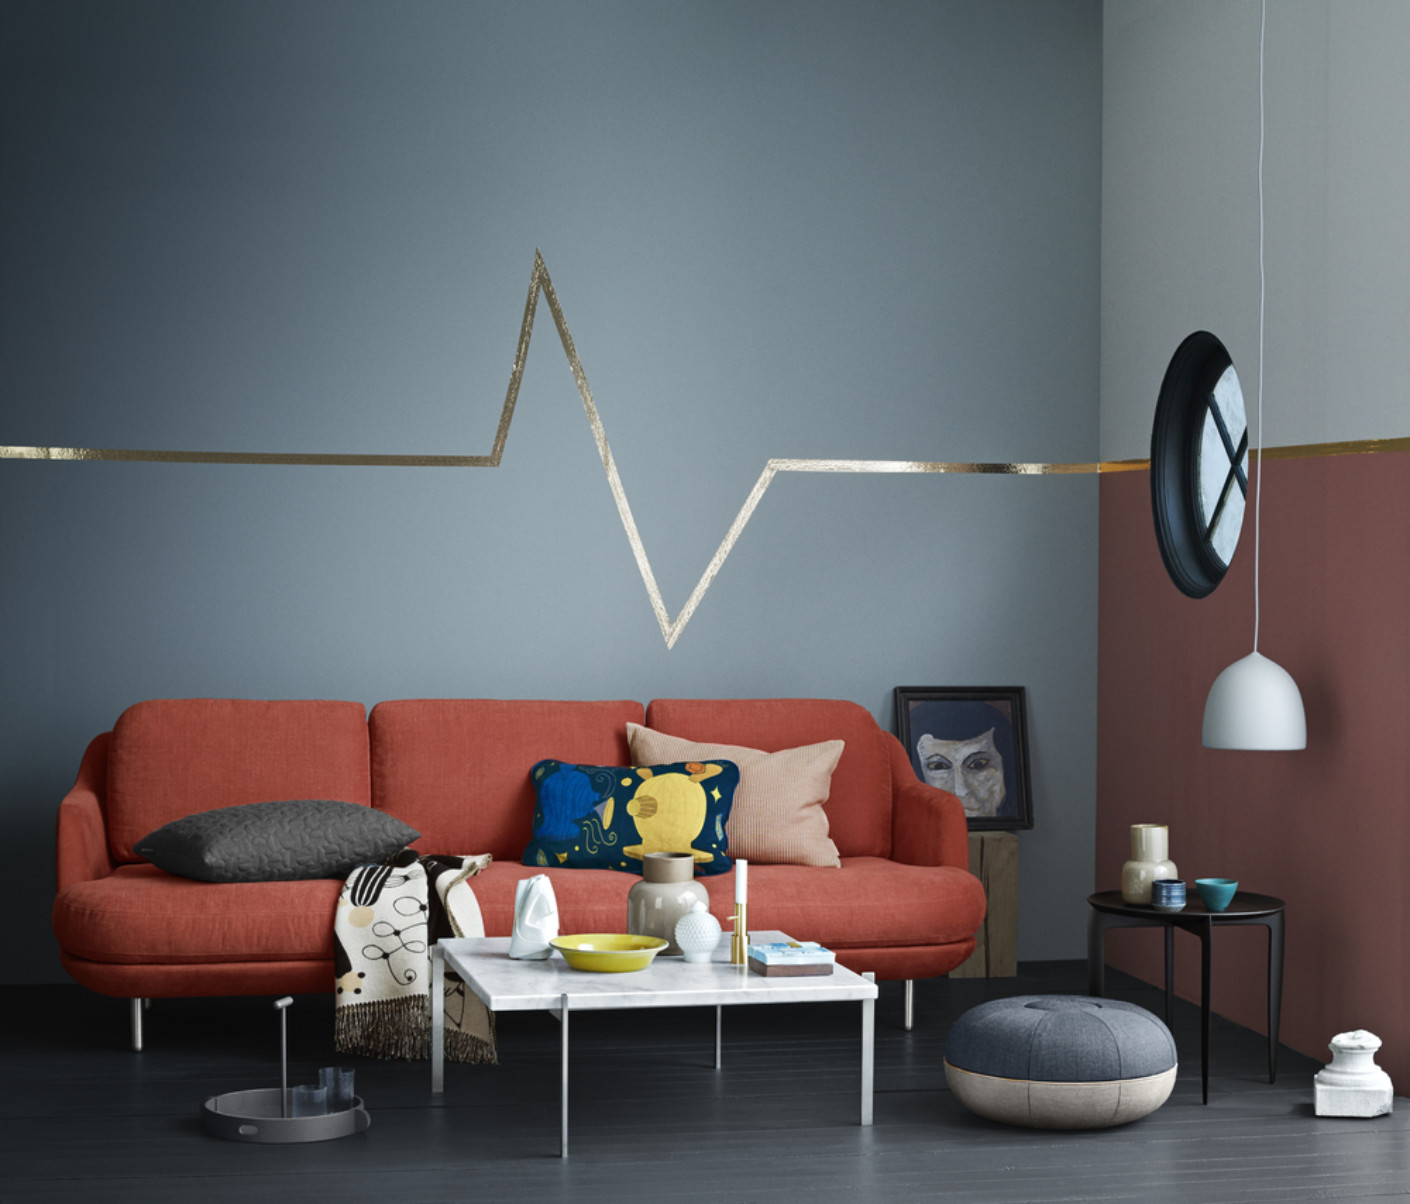 Lune Sofa Collection by Jaime Hayon for Fritz Hansen